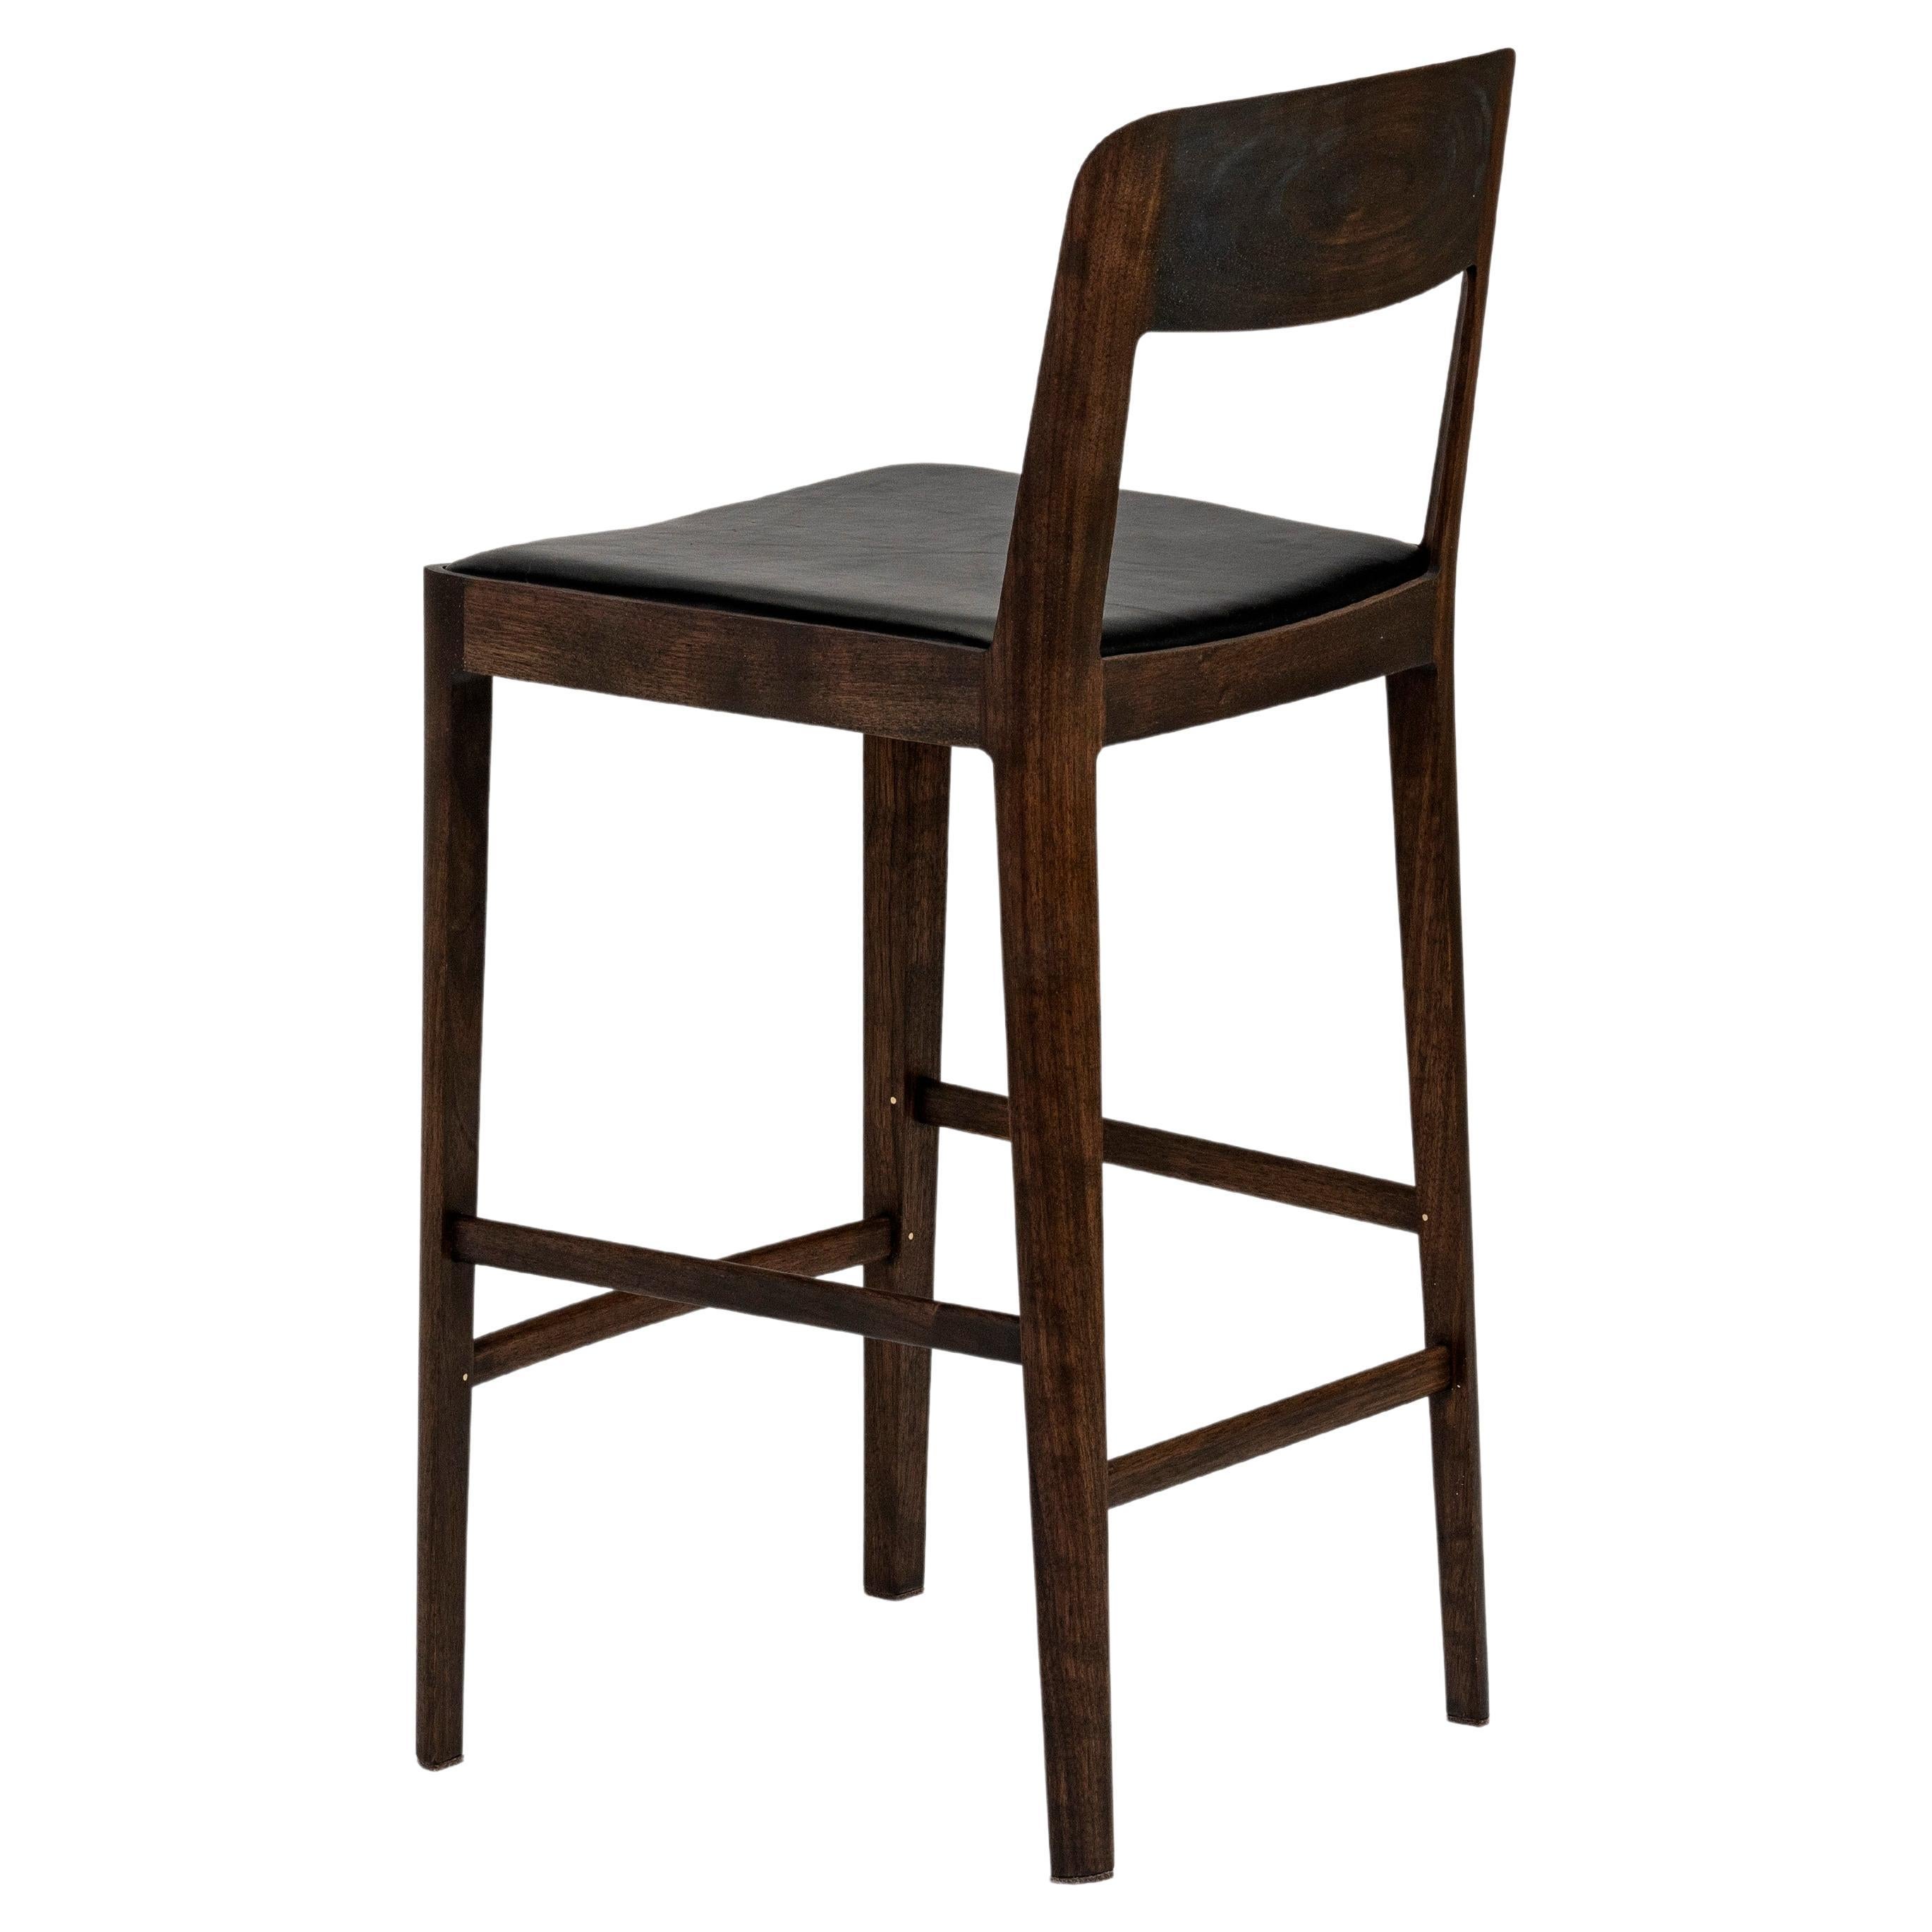 Linea Barstool, Walnut with Upholstered Seat and Backrest in Leather (Black)